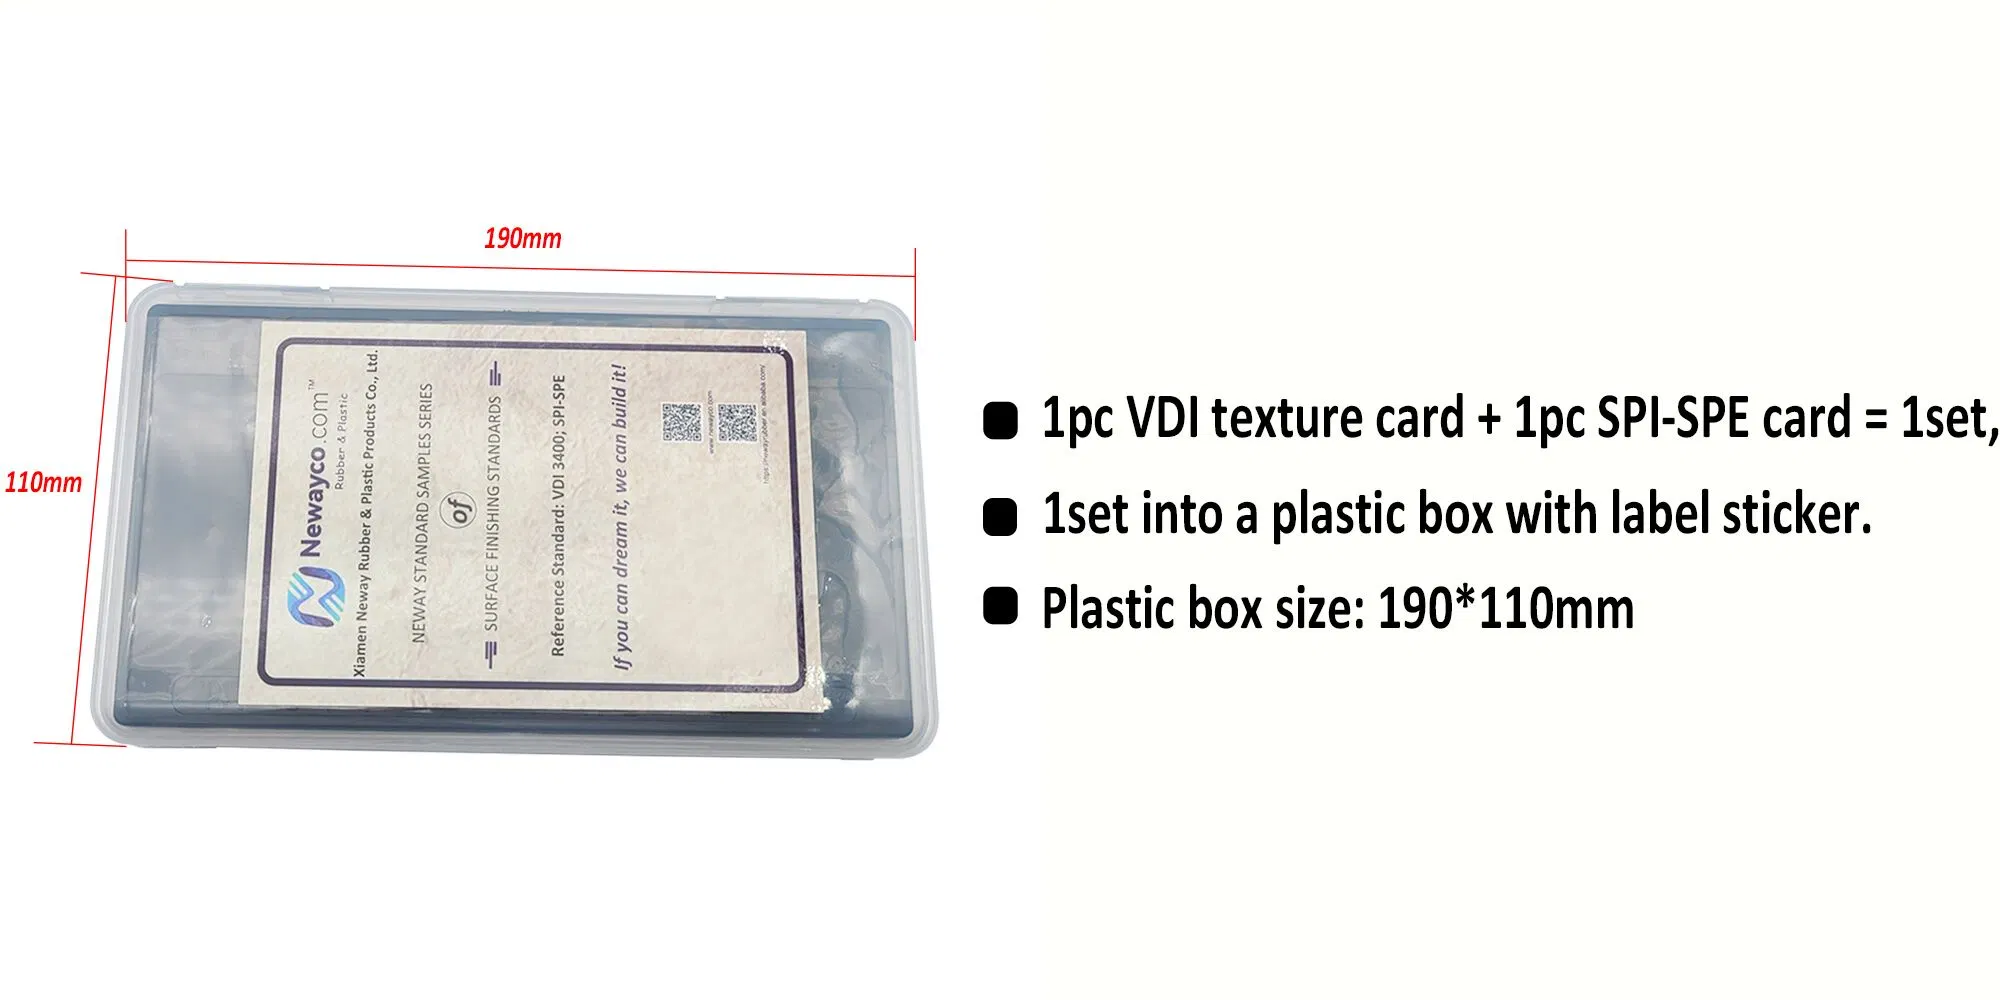 Vdi 3400 Texture Card & Spi-Spe Finish Card for Plastic Surface Finish Plastic Sample Card in Stock